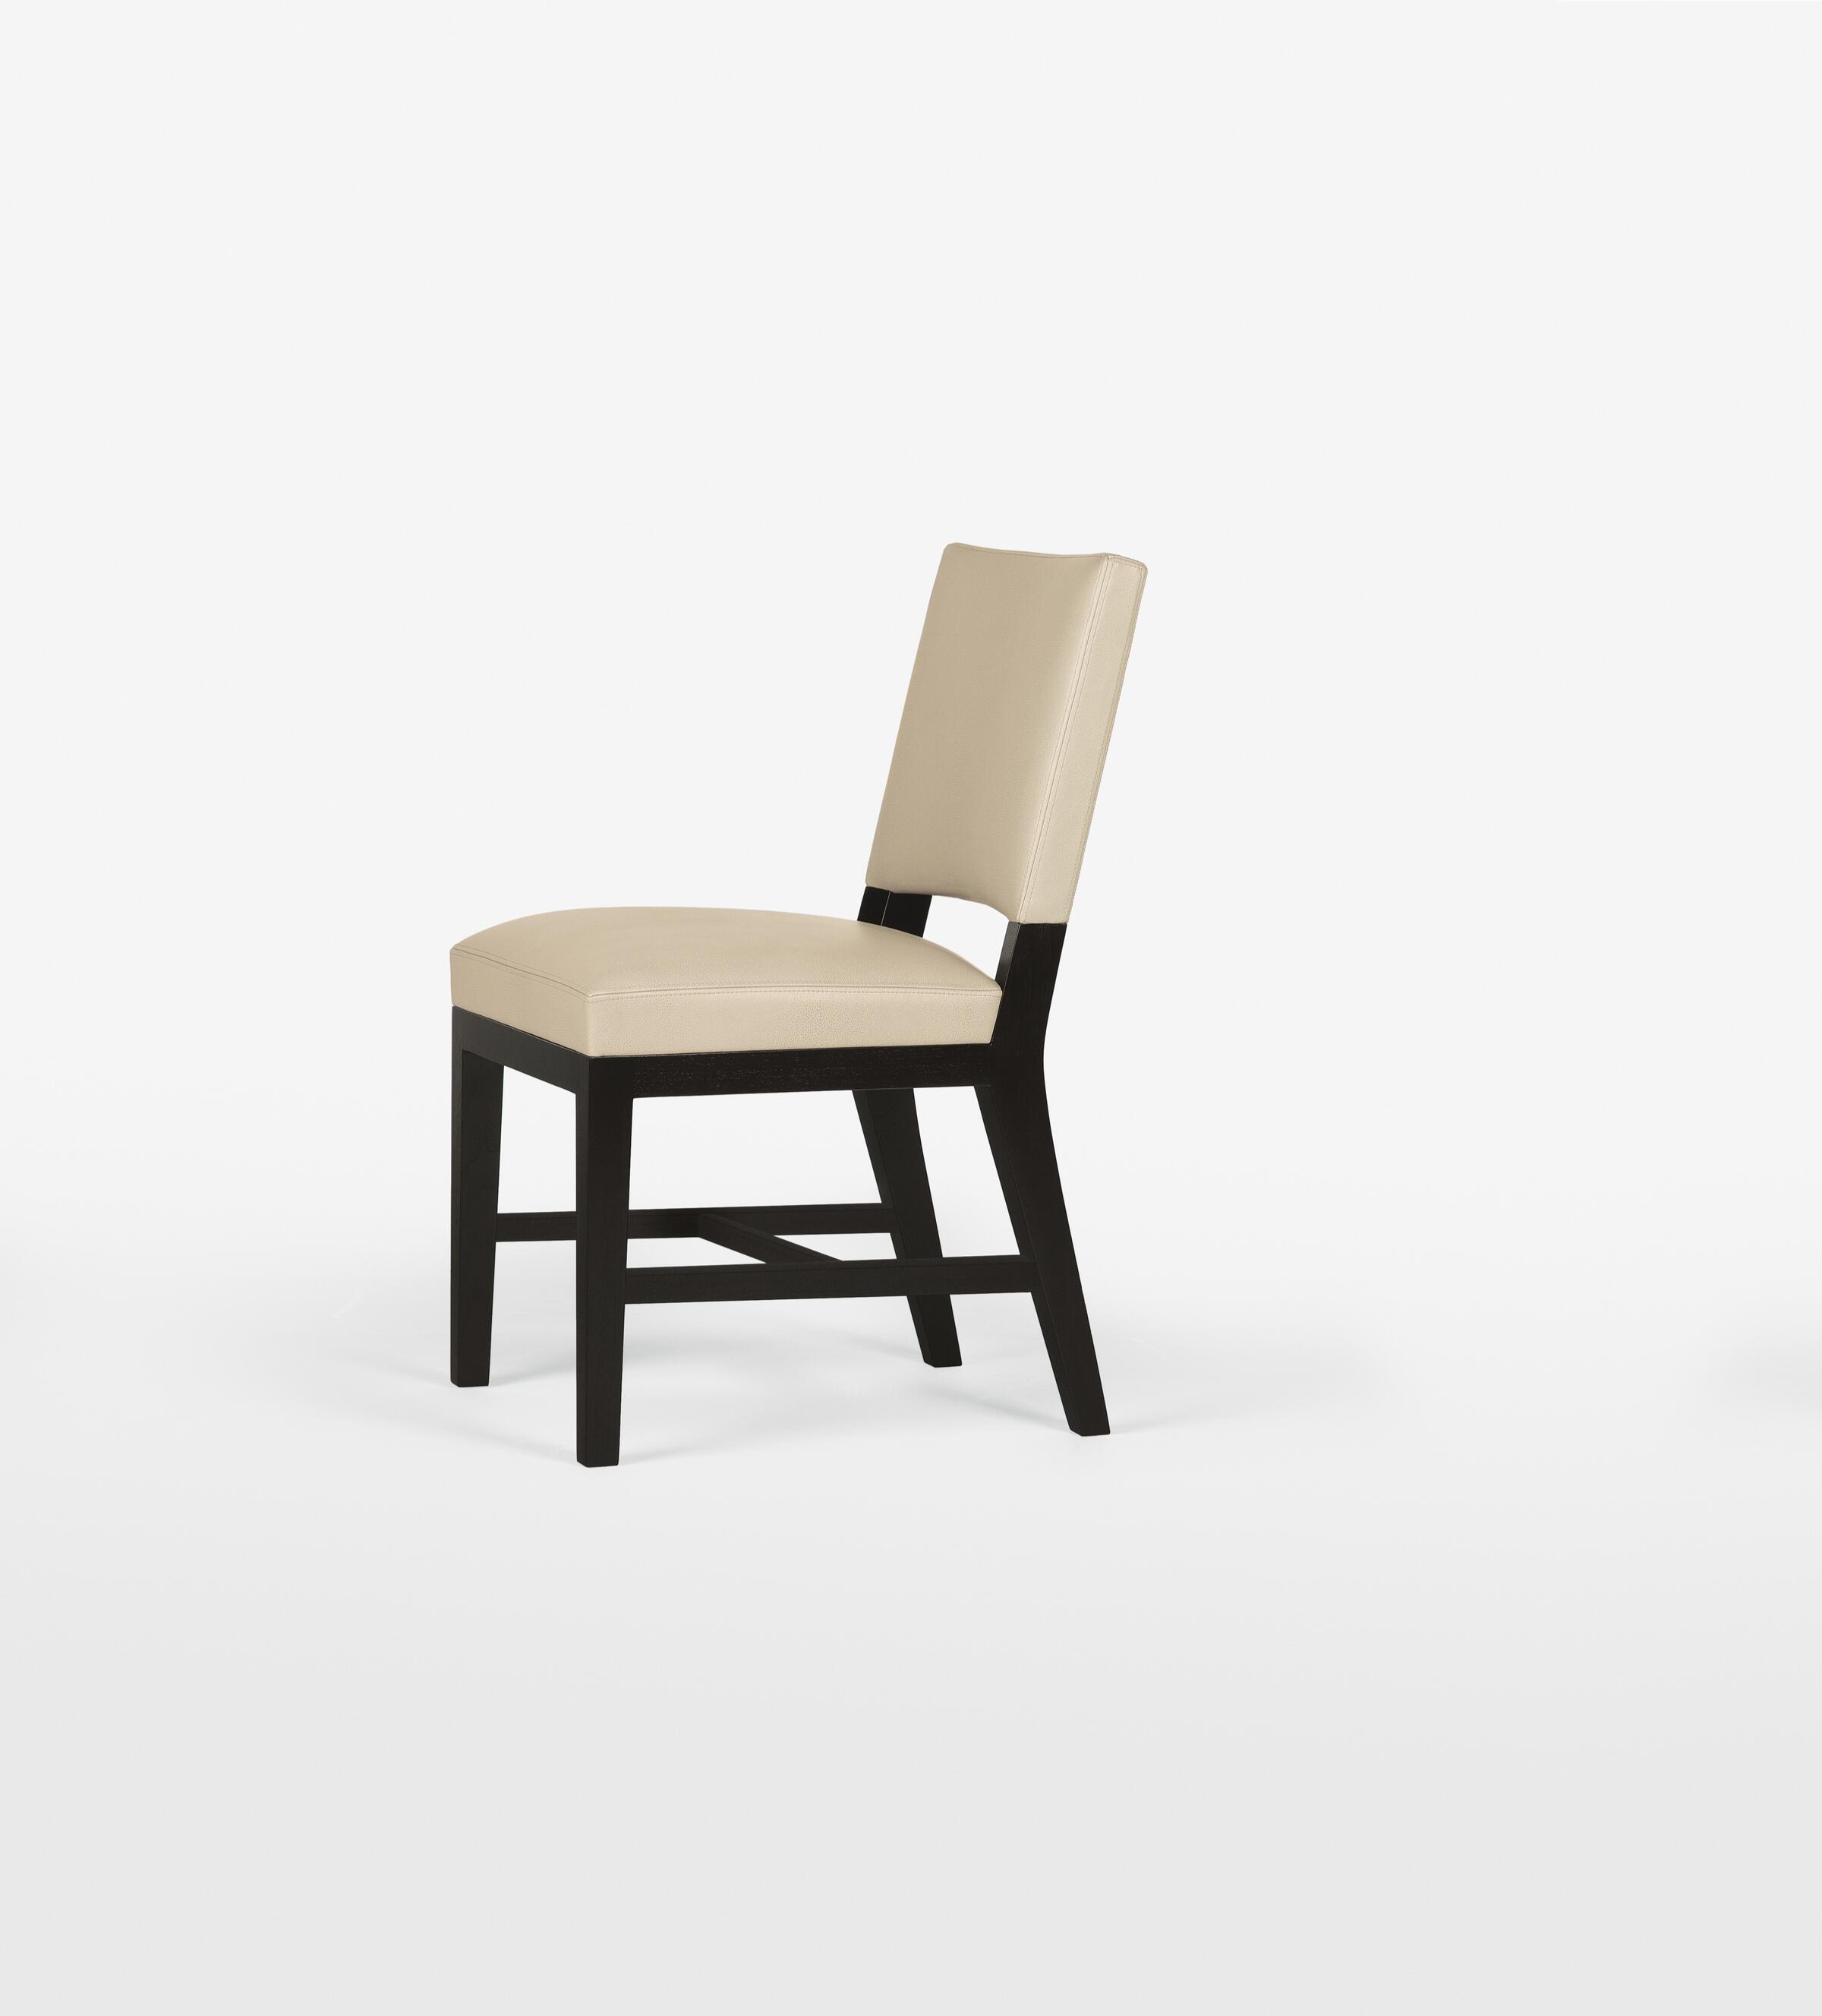 Luna Dining Arm Chair with stretcher